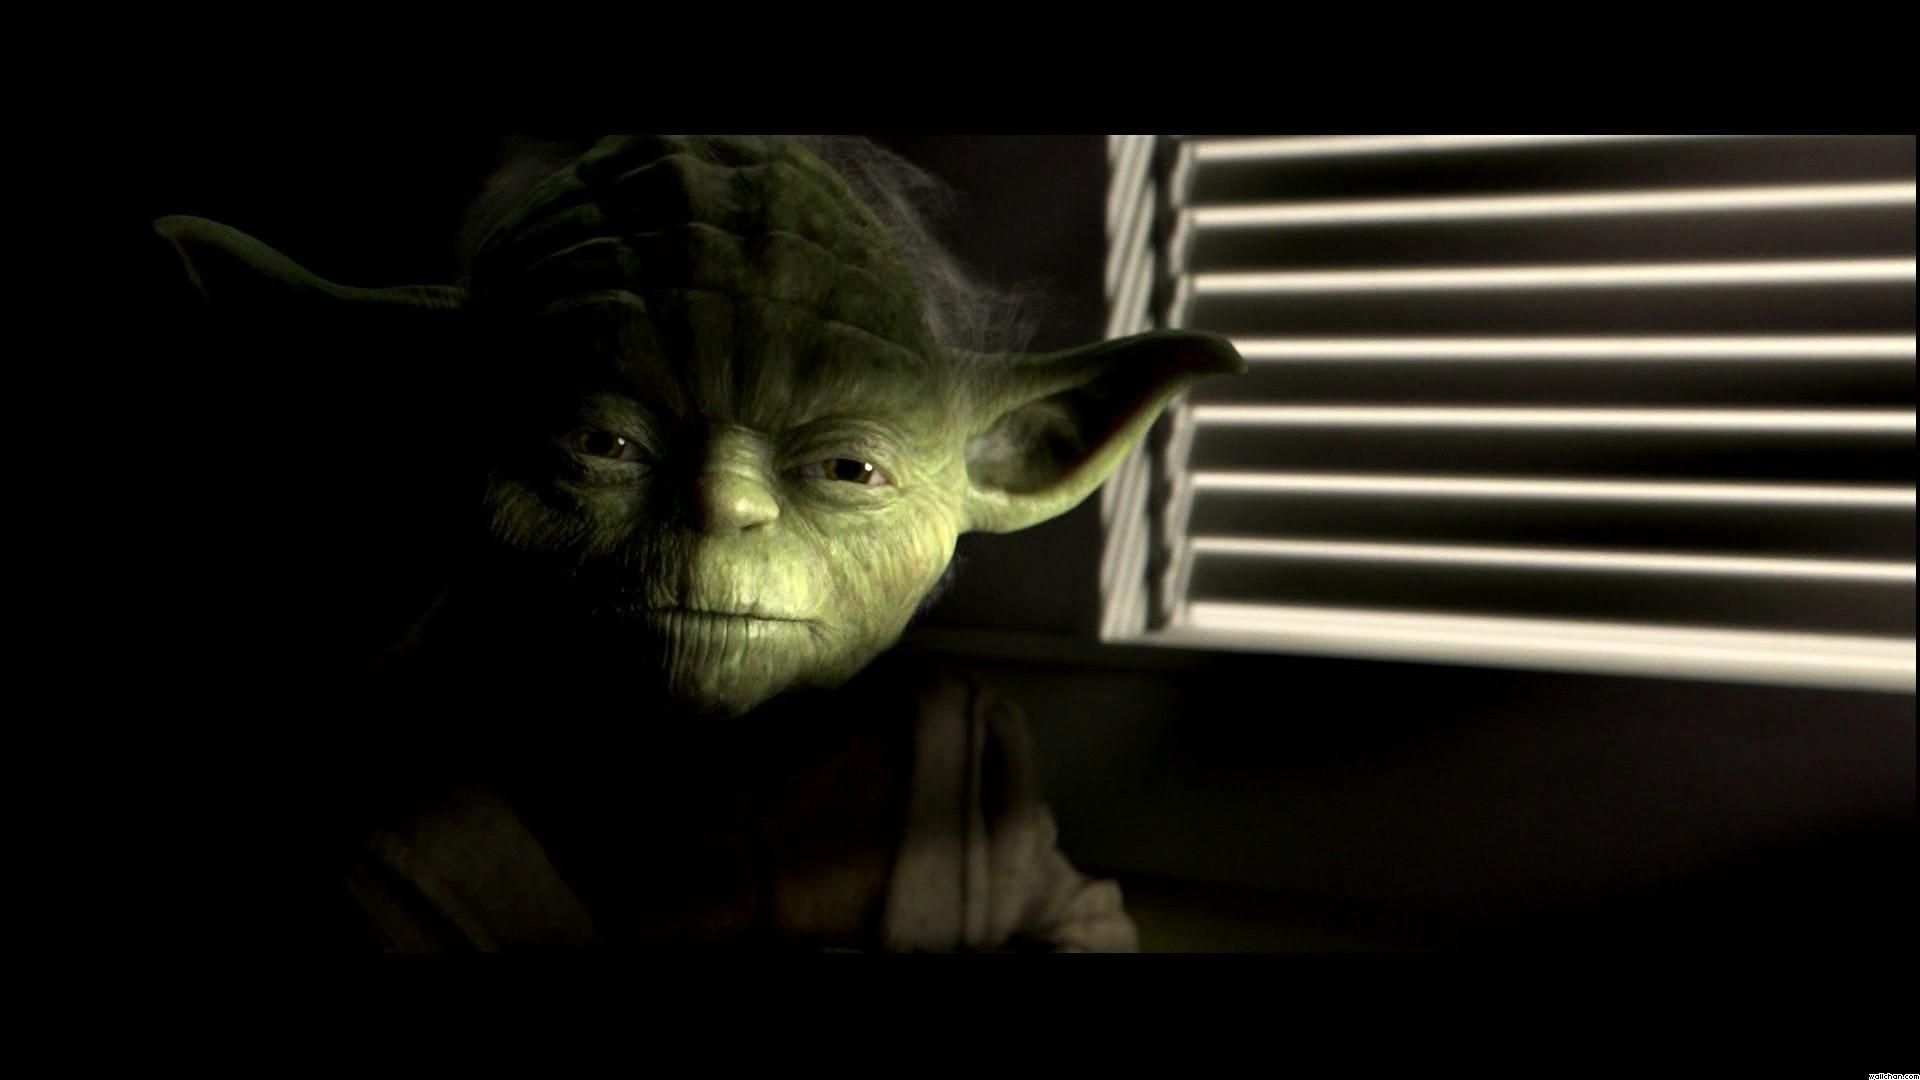 Yoda 4K wallpaper for your desktop or mobile screen free and easy